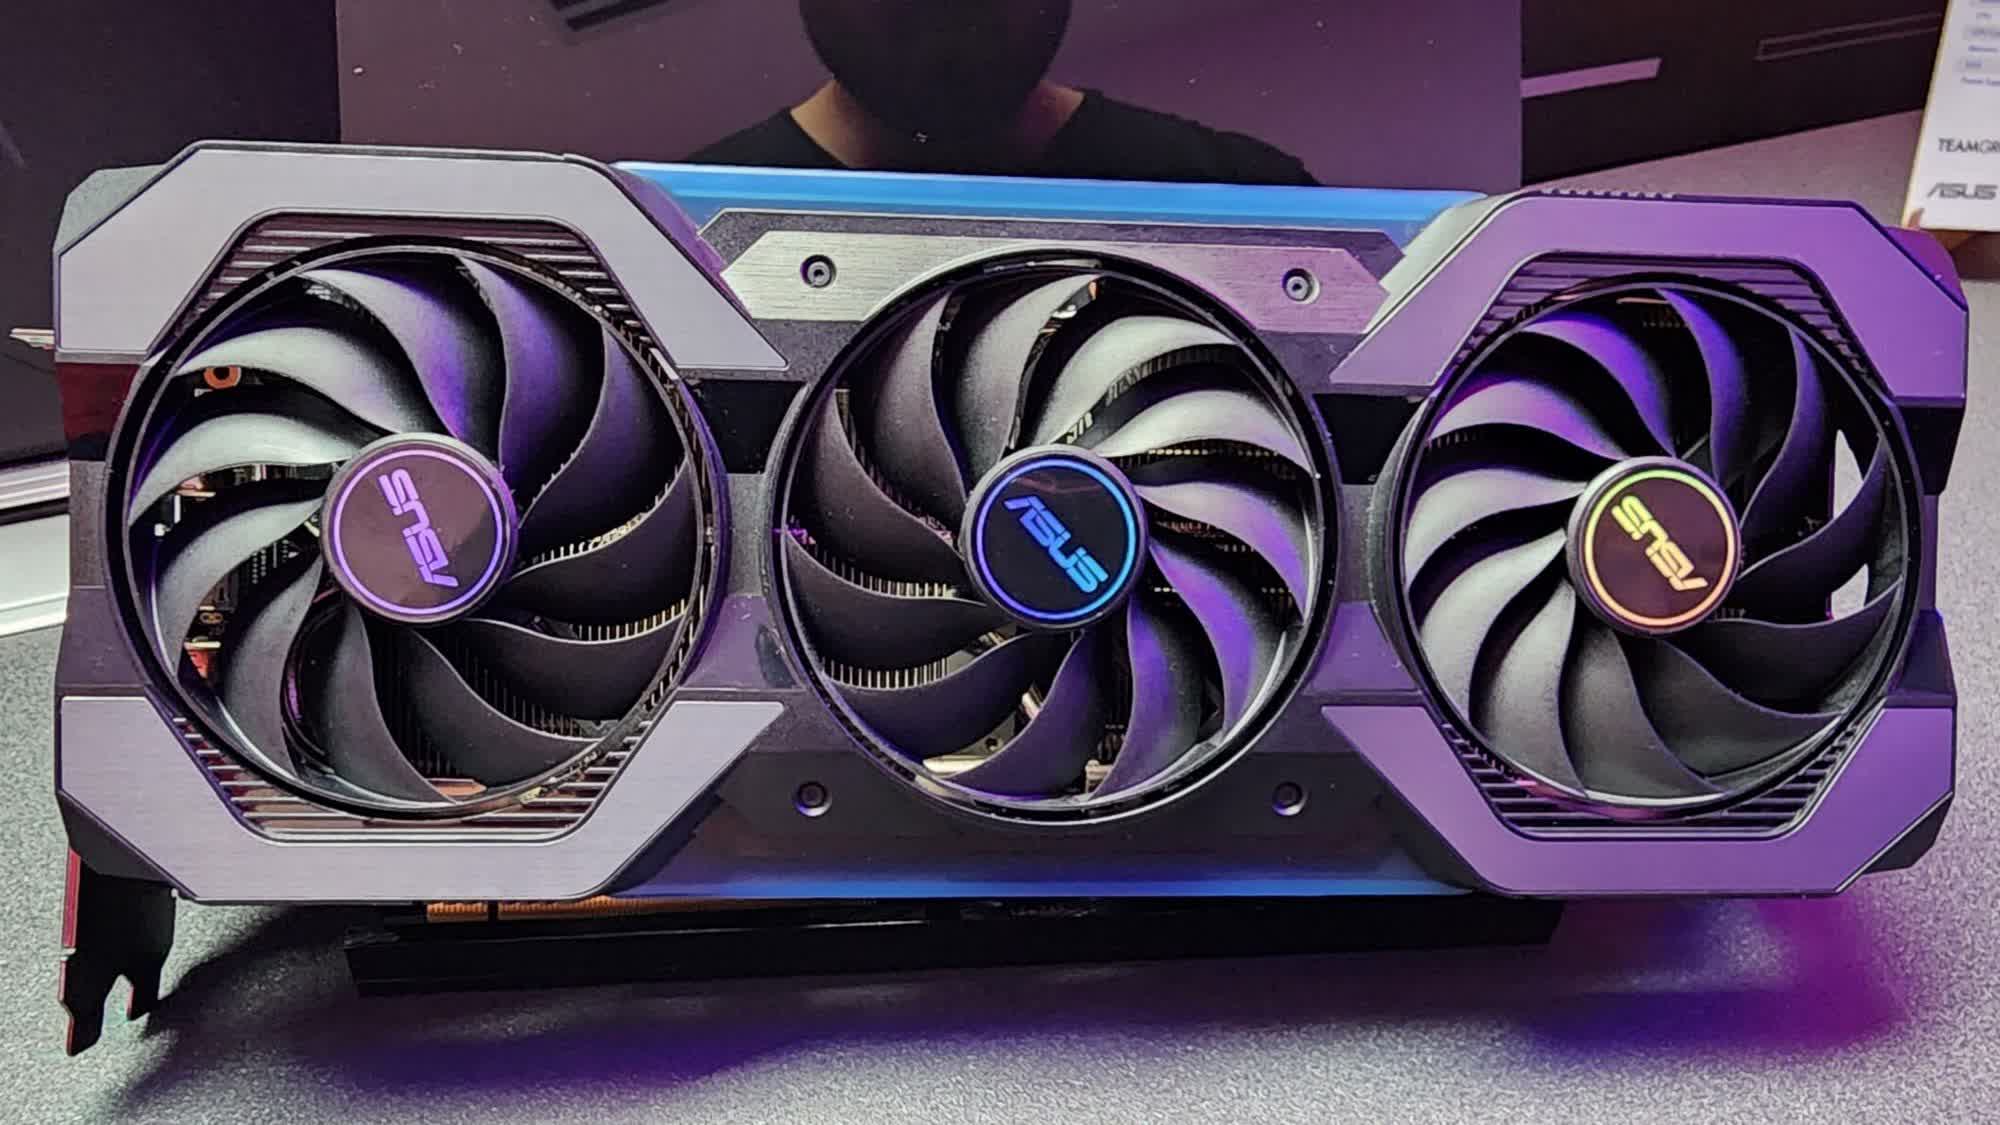 Asus demos concept RTX 4070 graphics card that doesn't use any power cables